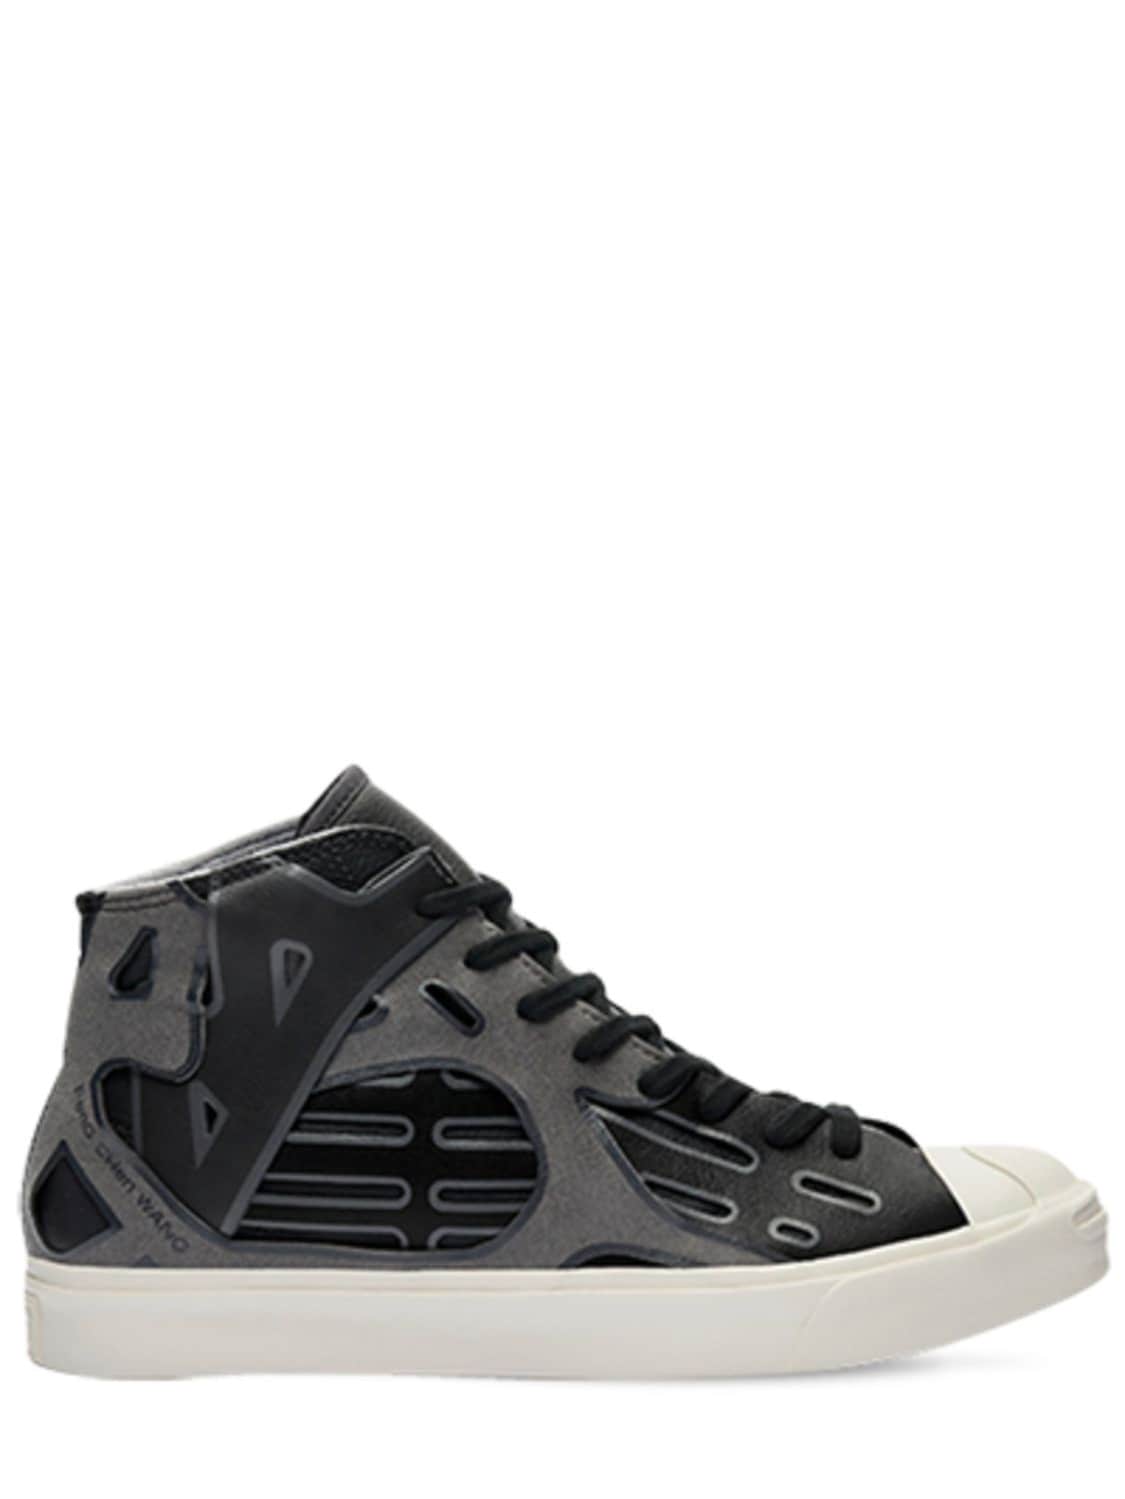 Converse Feng Chen Wang Jack Purcell Mid Sneakers In Black